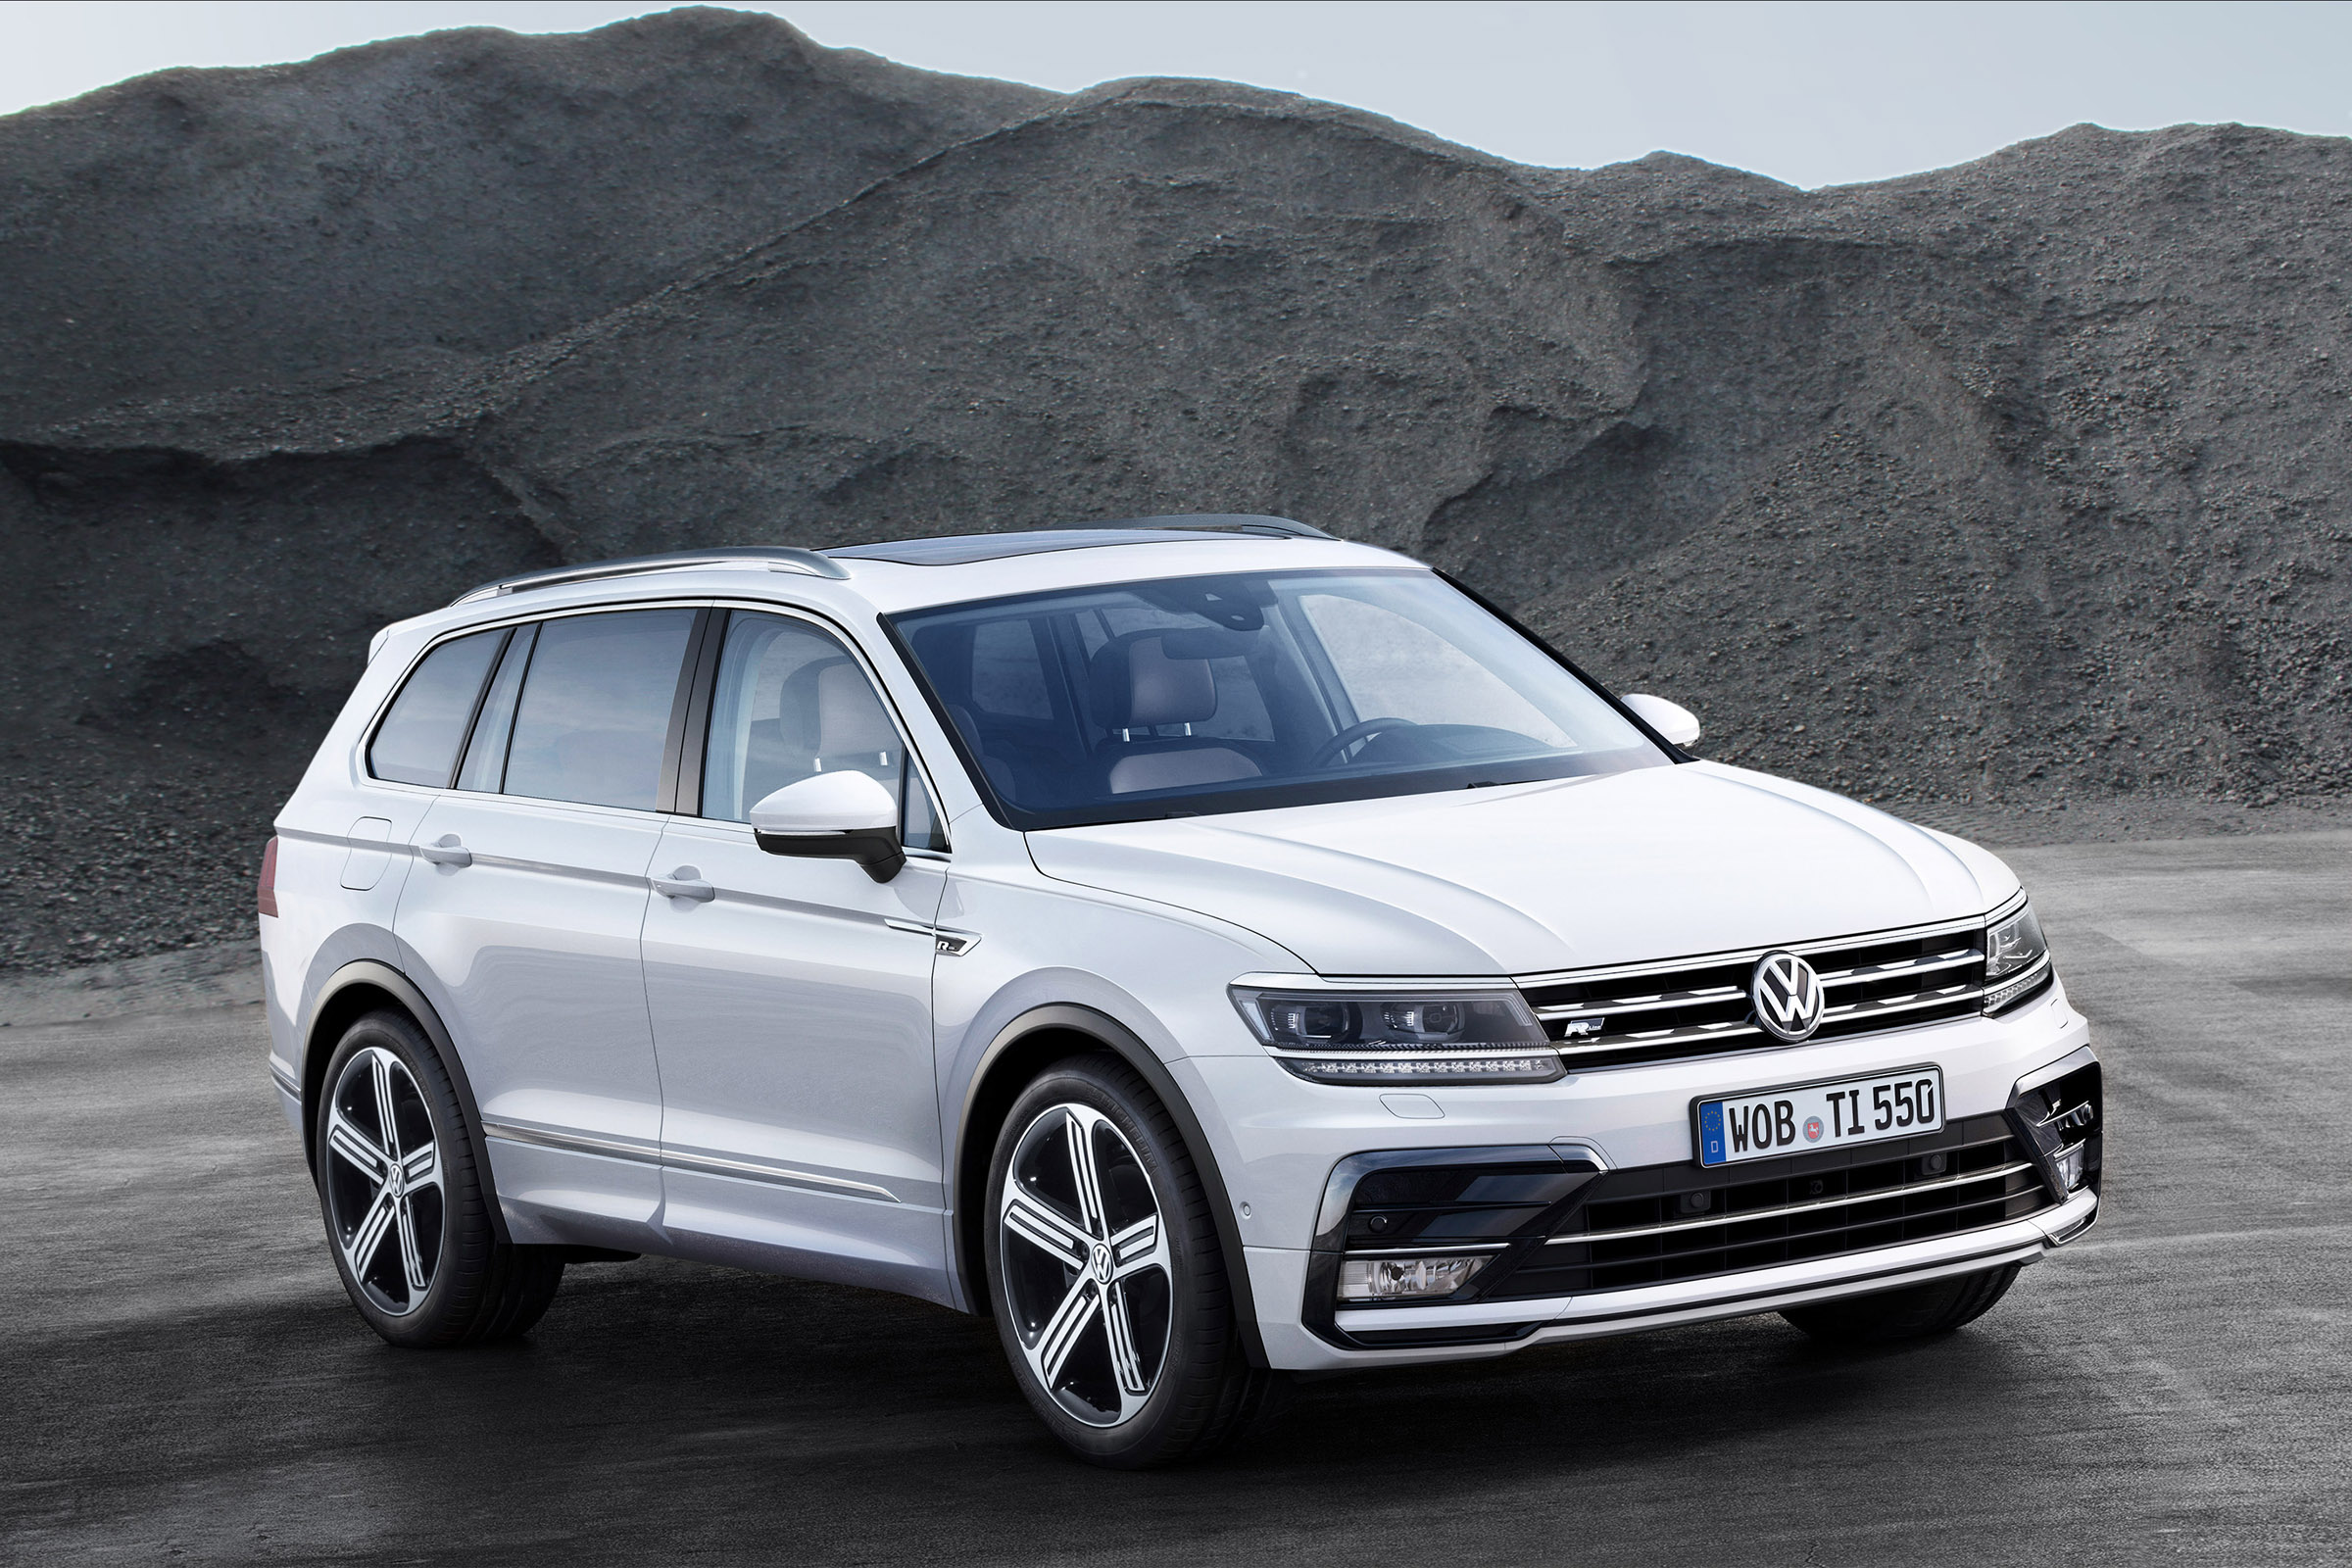 Volkswagen Tiguan 7 Seater Reviews Prices Ratings With Various Photos